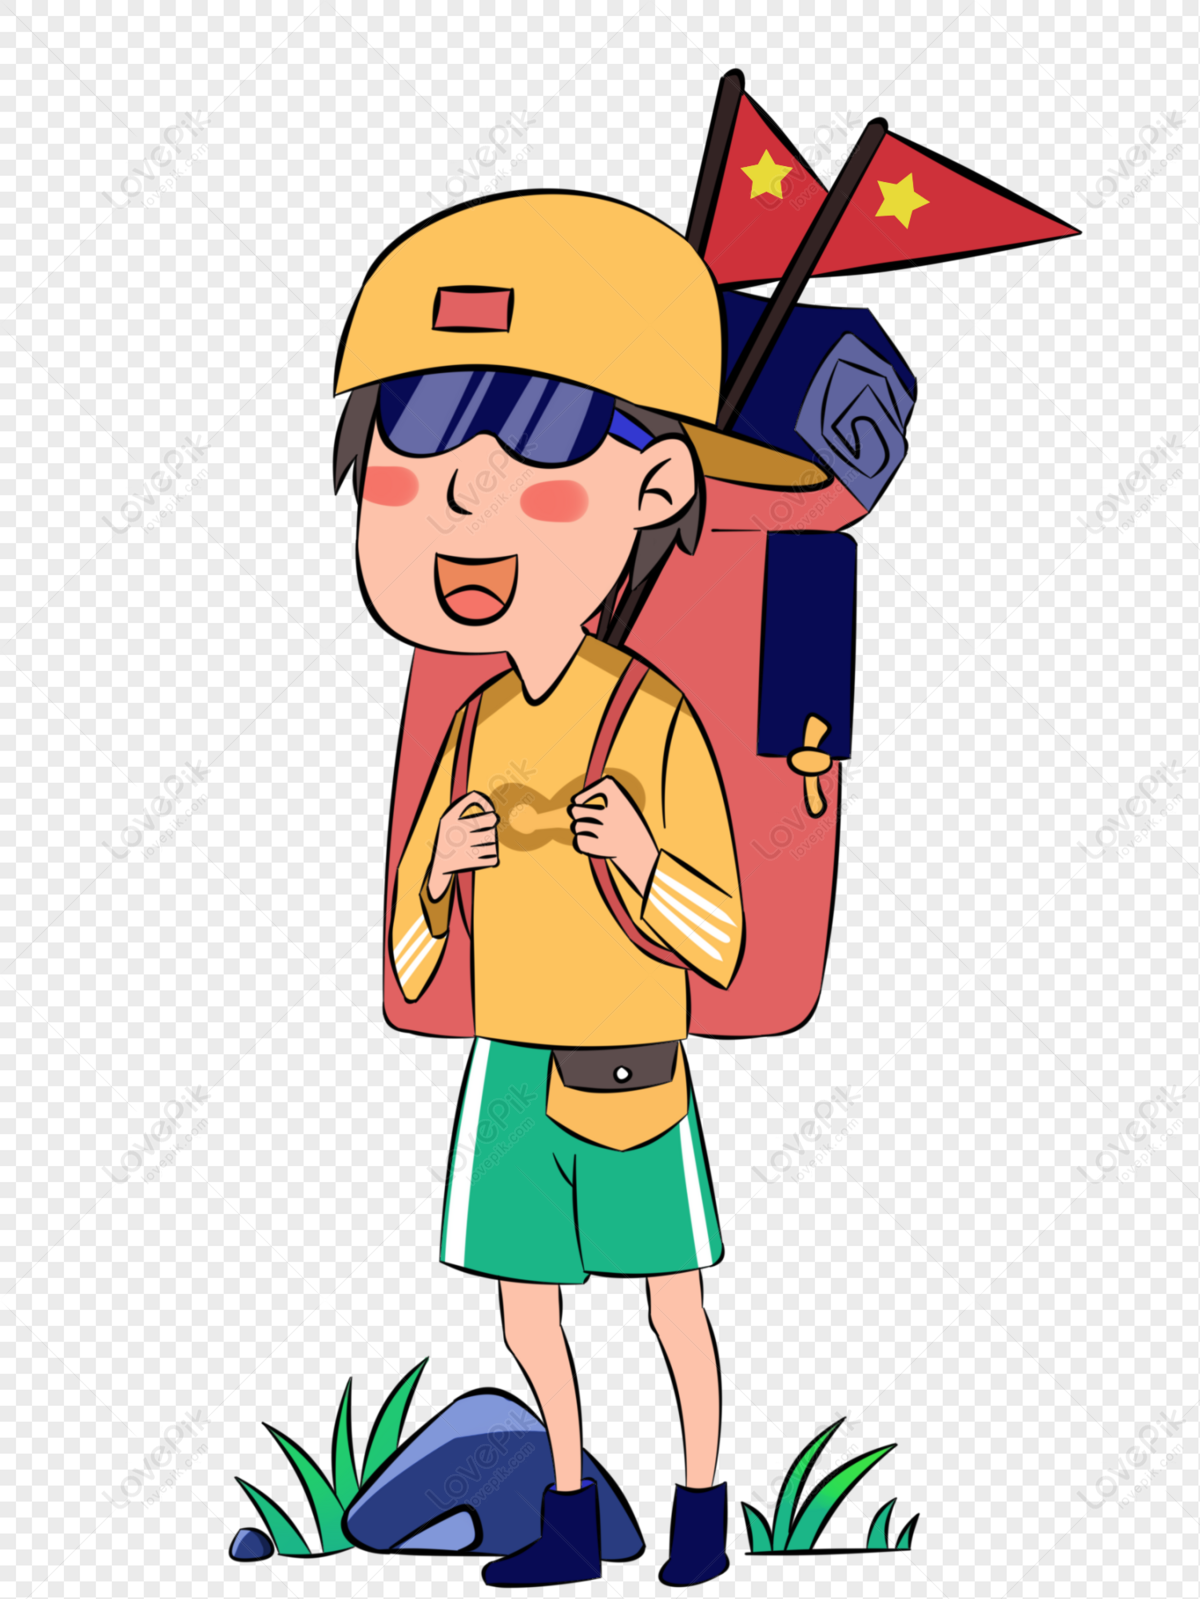 Teenager Cartoon Carrying A Luggage For The National Day Holiday PNG  Picture And Clipart Image For Free Download - Lovepik | 401440385